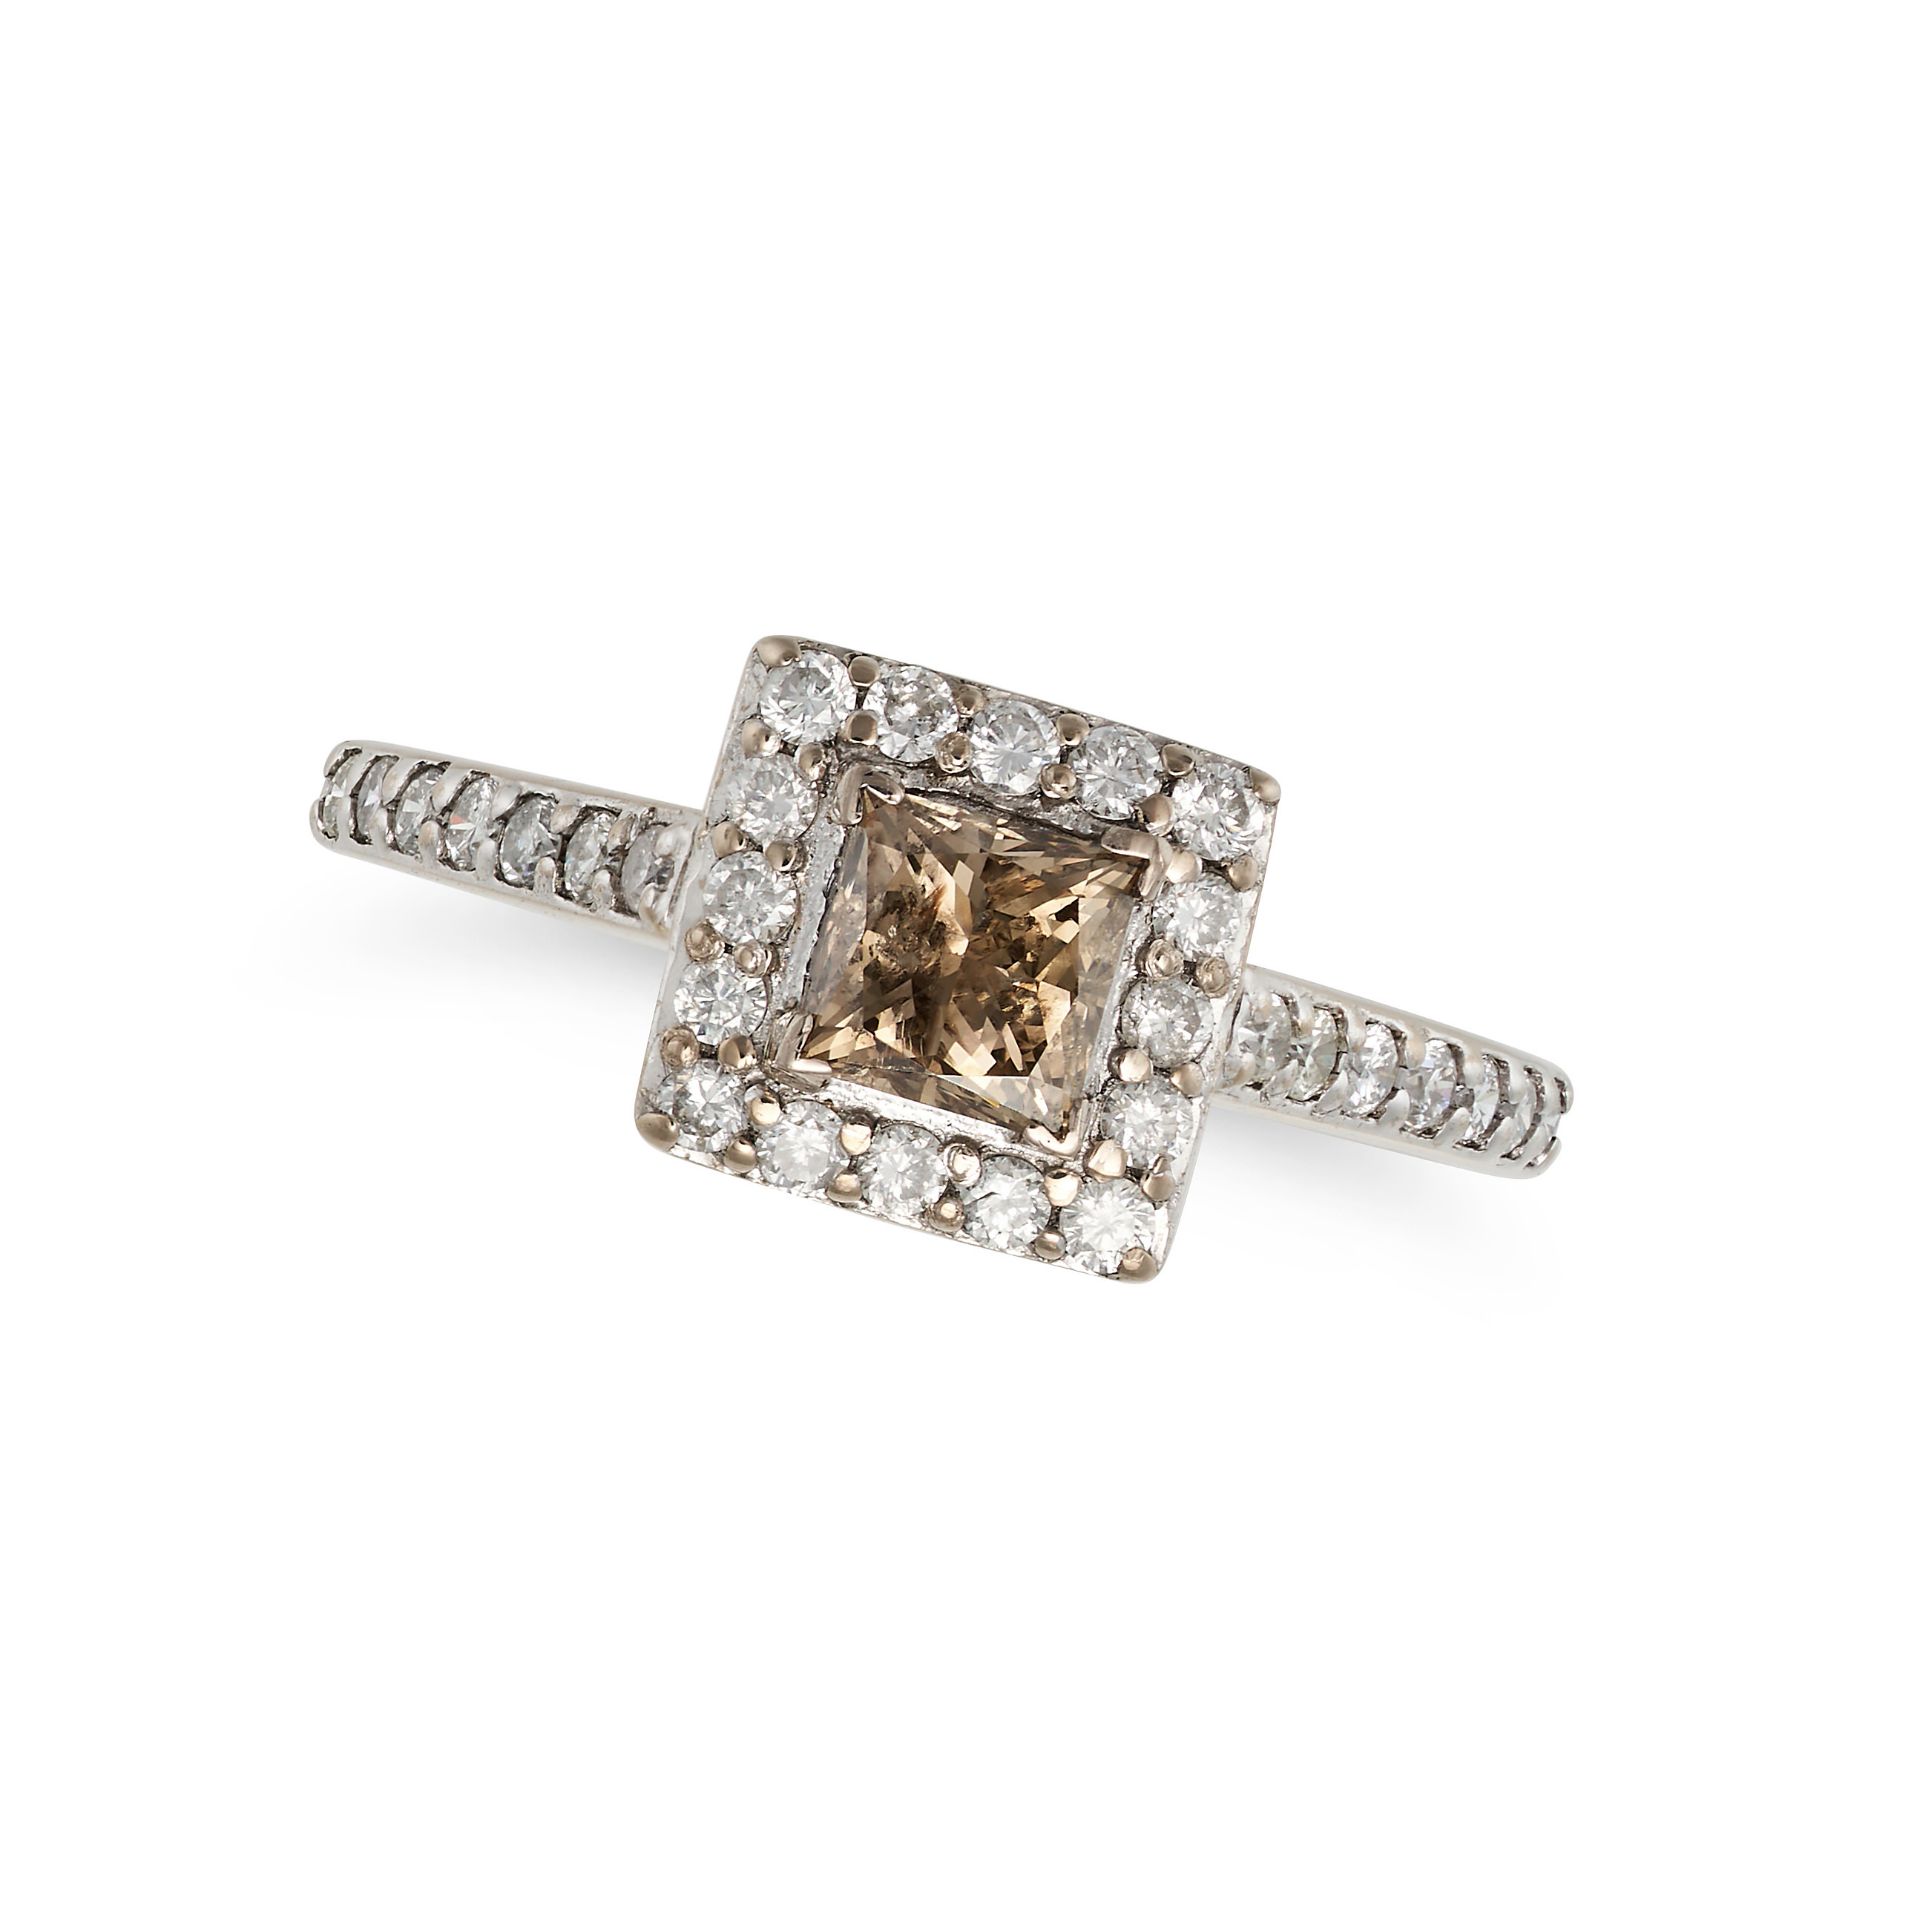 A BROWN AND WHITE DIAMOND CLUSTER RING in 18ct white gold, set with a princess cut brown diamond ...